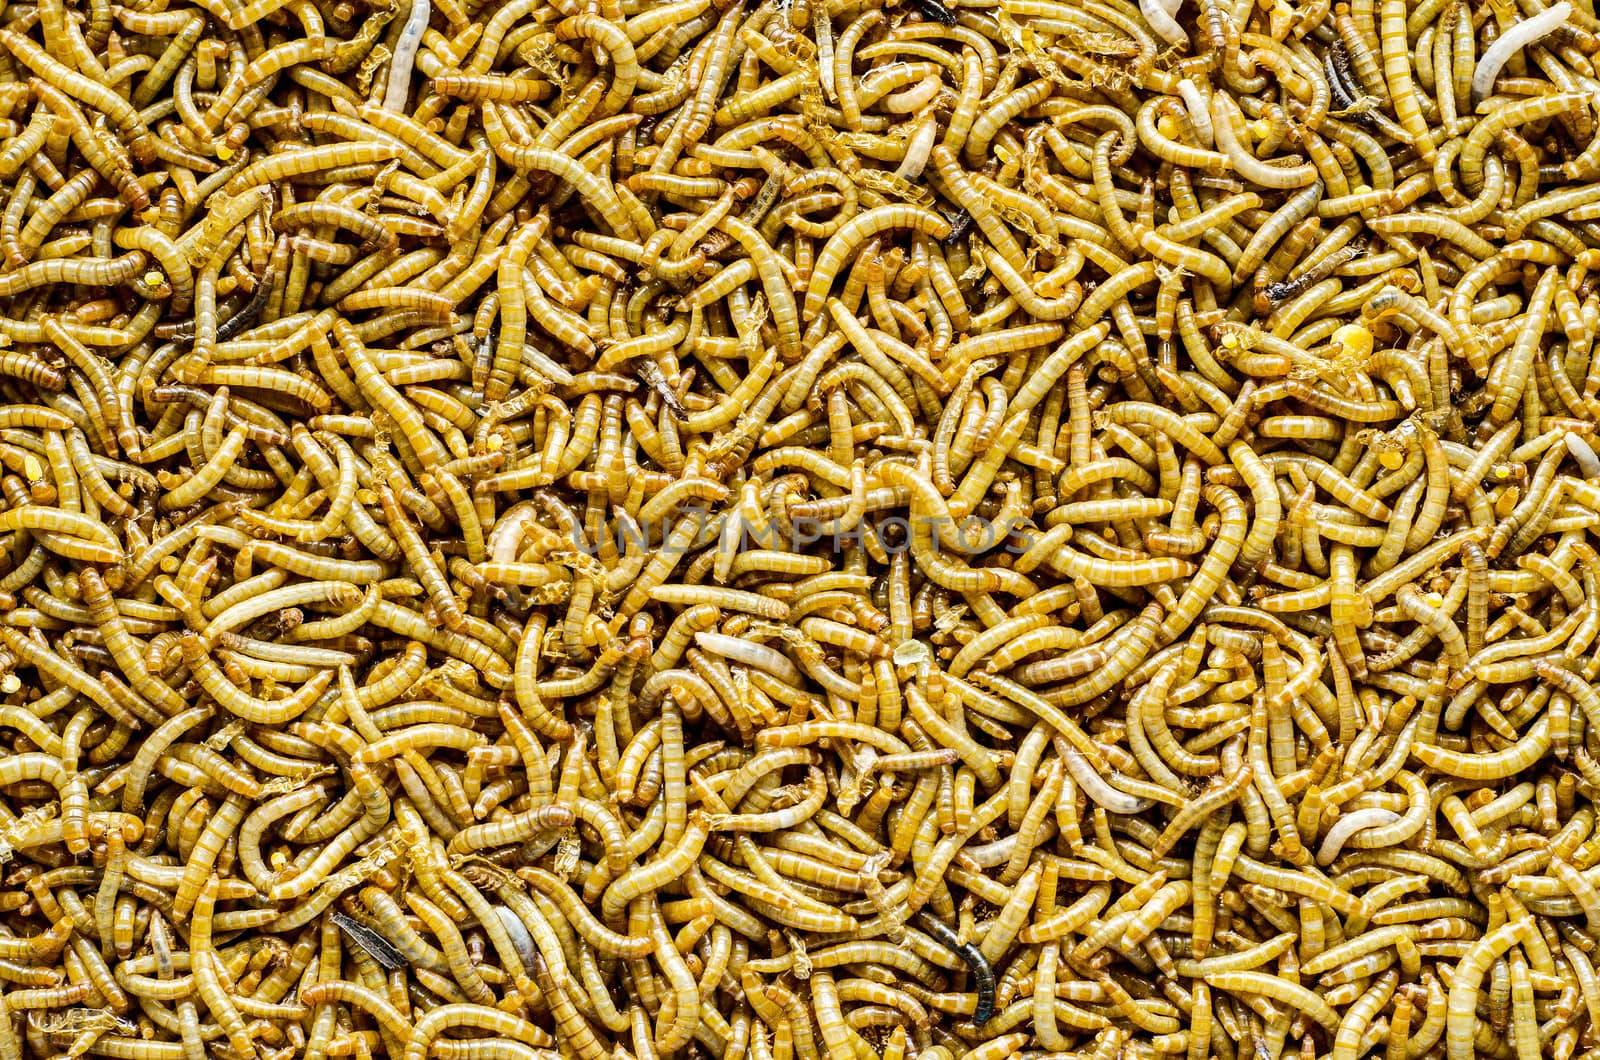 A scatter of mealworm larvae, used for feeding birds, reptiles or fish.